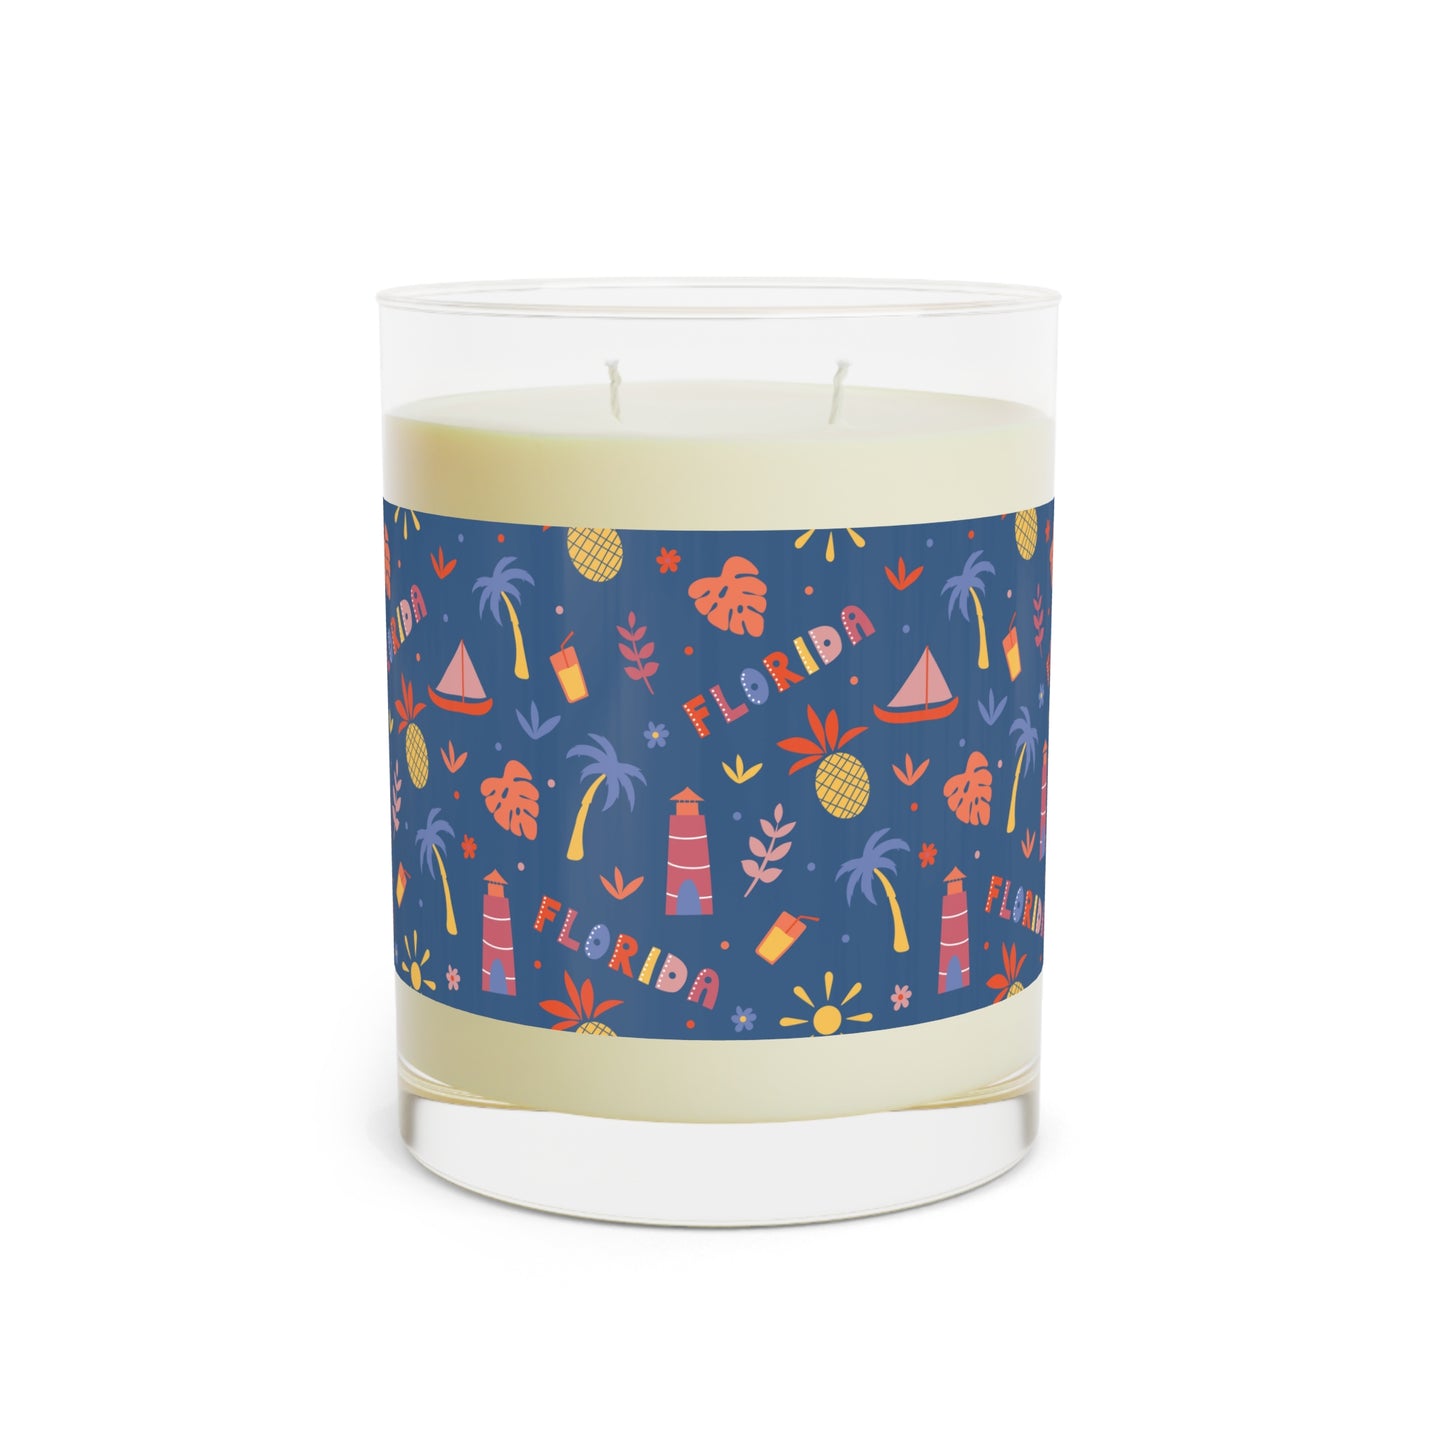 Florida Lover Scented Soy Wax Candle